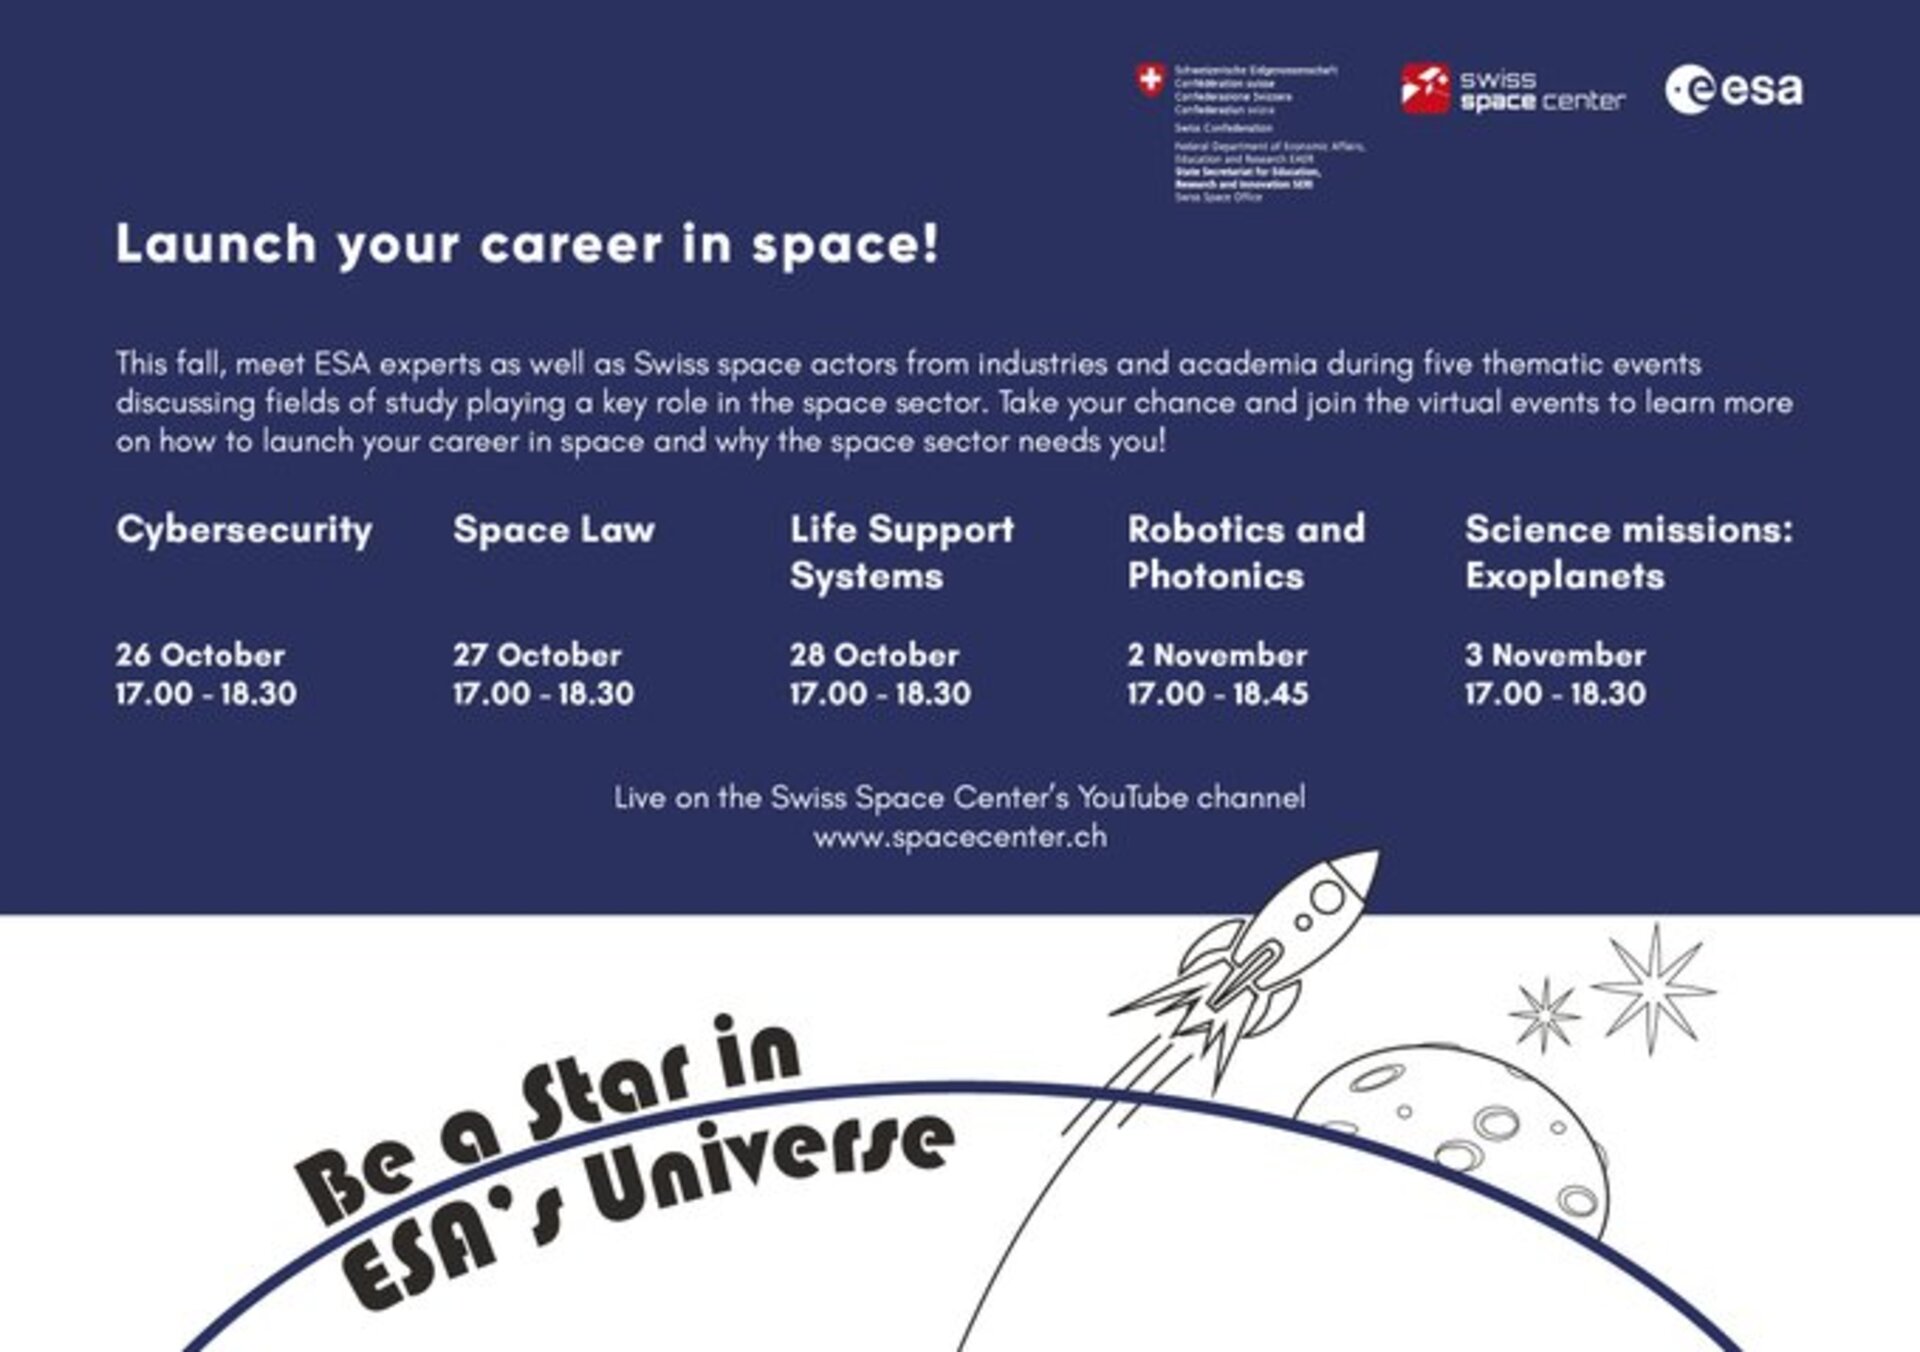 Be a Star in ESA’s Universe 2020